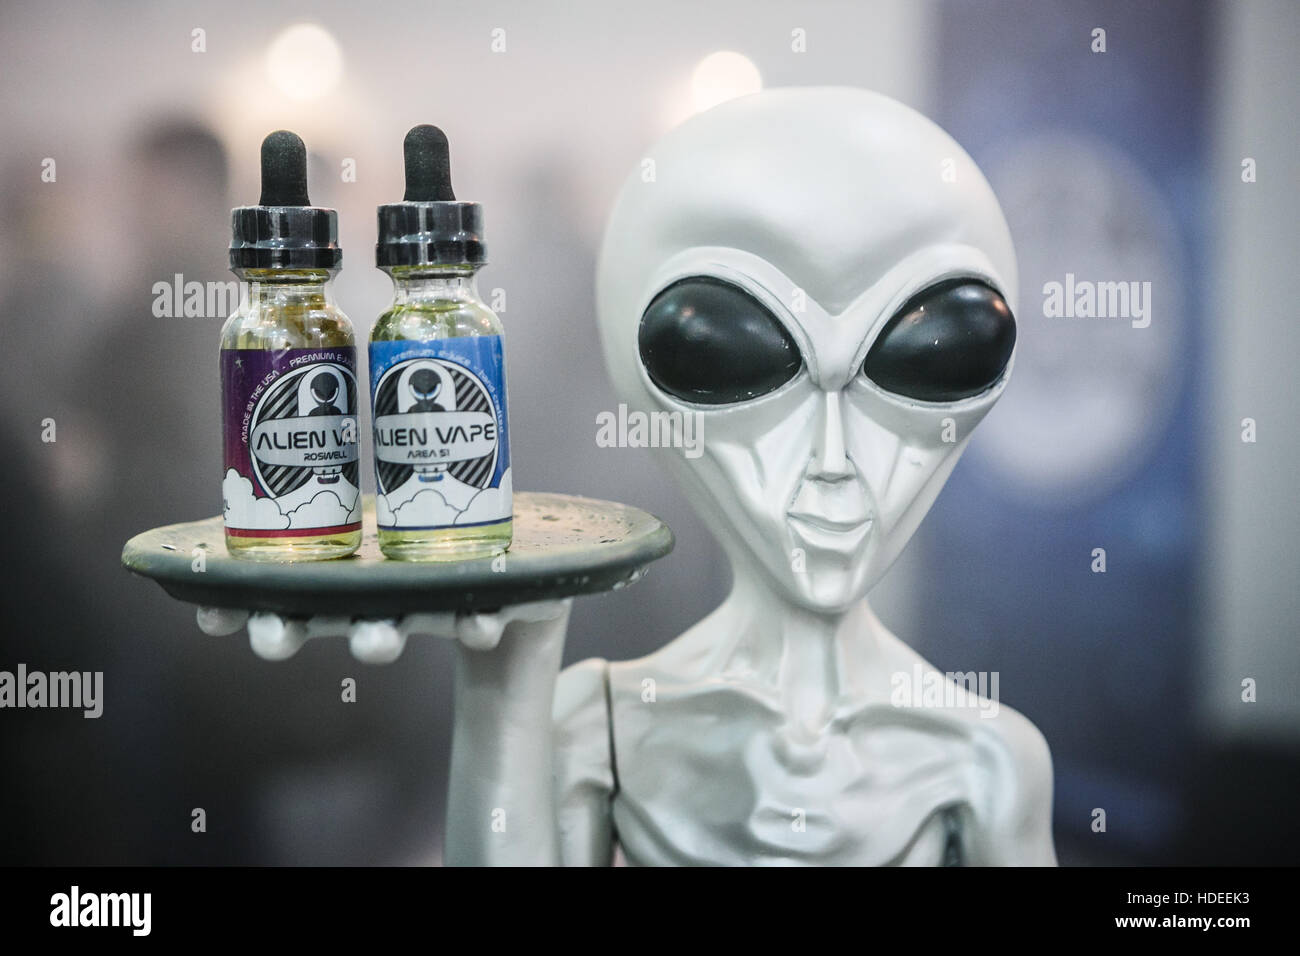 MOSCOW - 9 DECEMBER,2016: International Vape Expo.Alien action figure toy at ejuice sale stand Stock Photo